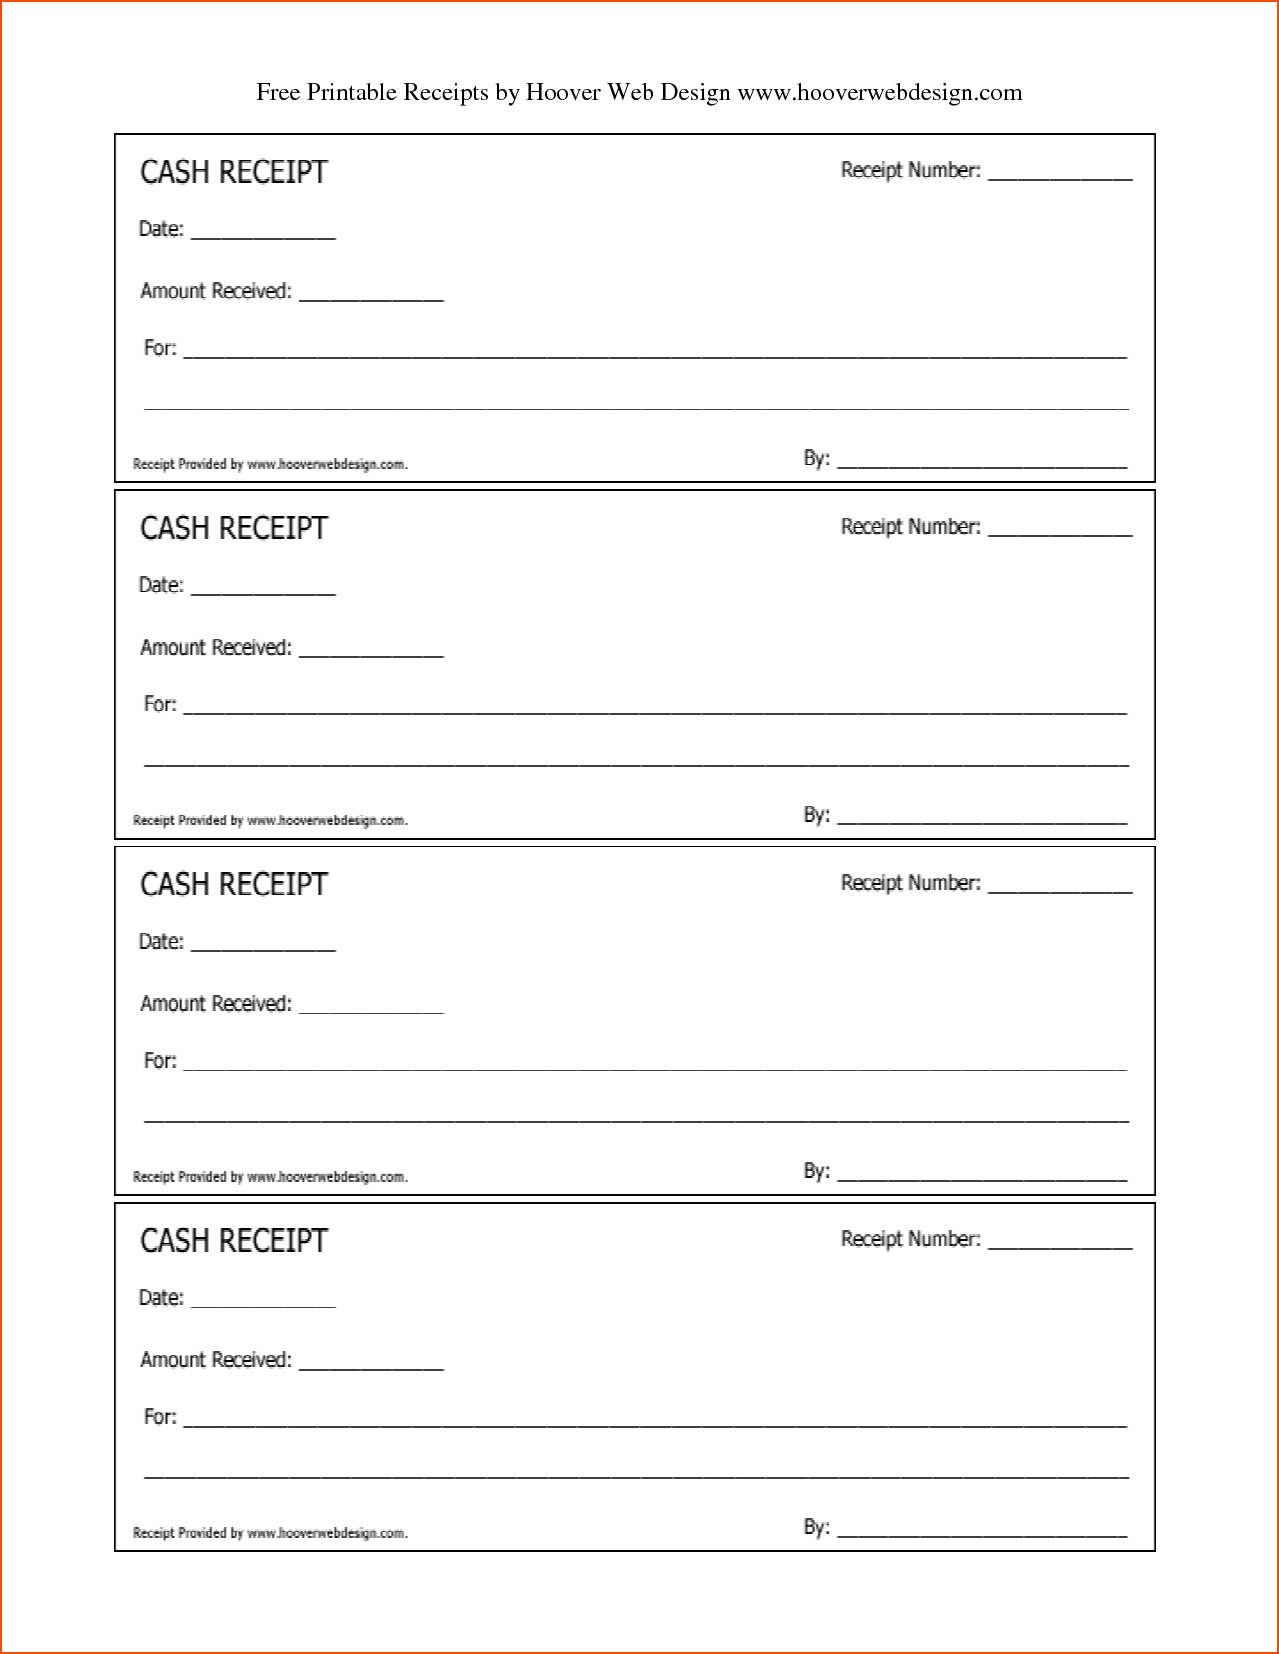 cash-log-out-daily-cash-report-free-office-form-template-free-cash-book-template-printable